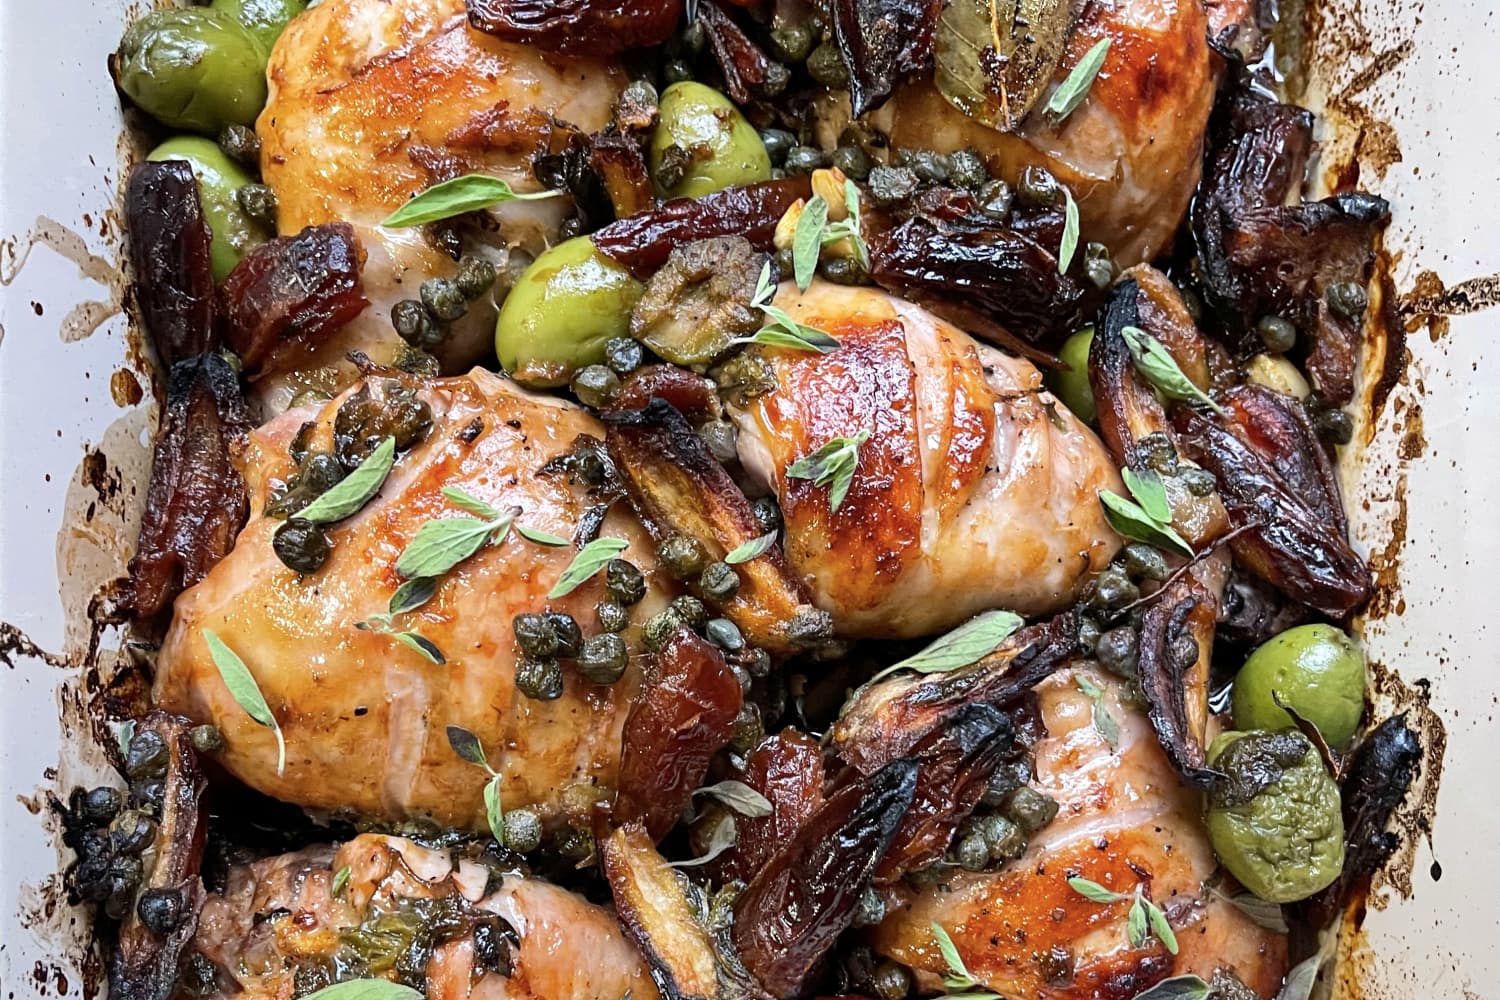 Ottolenghi's Chicken Marbella Recipe (With Dates and Olives)